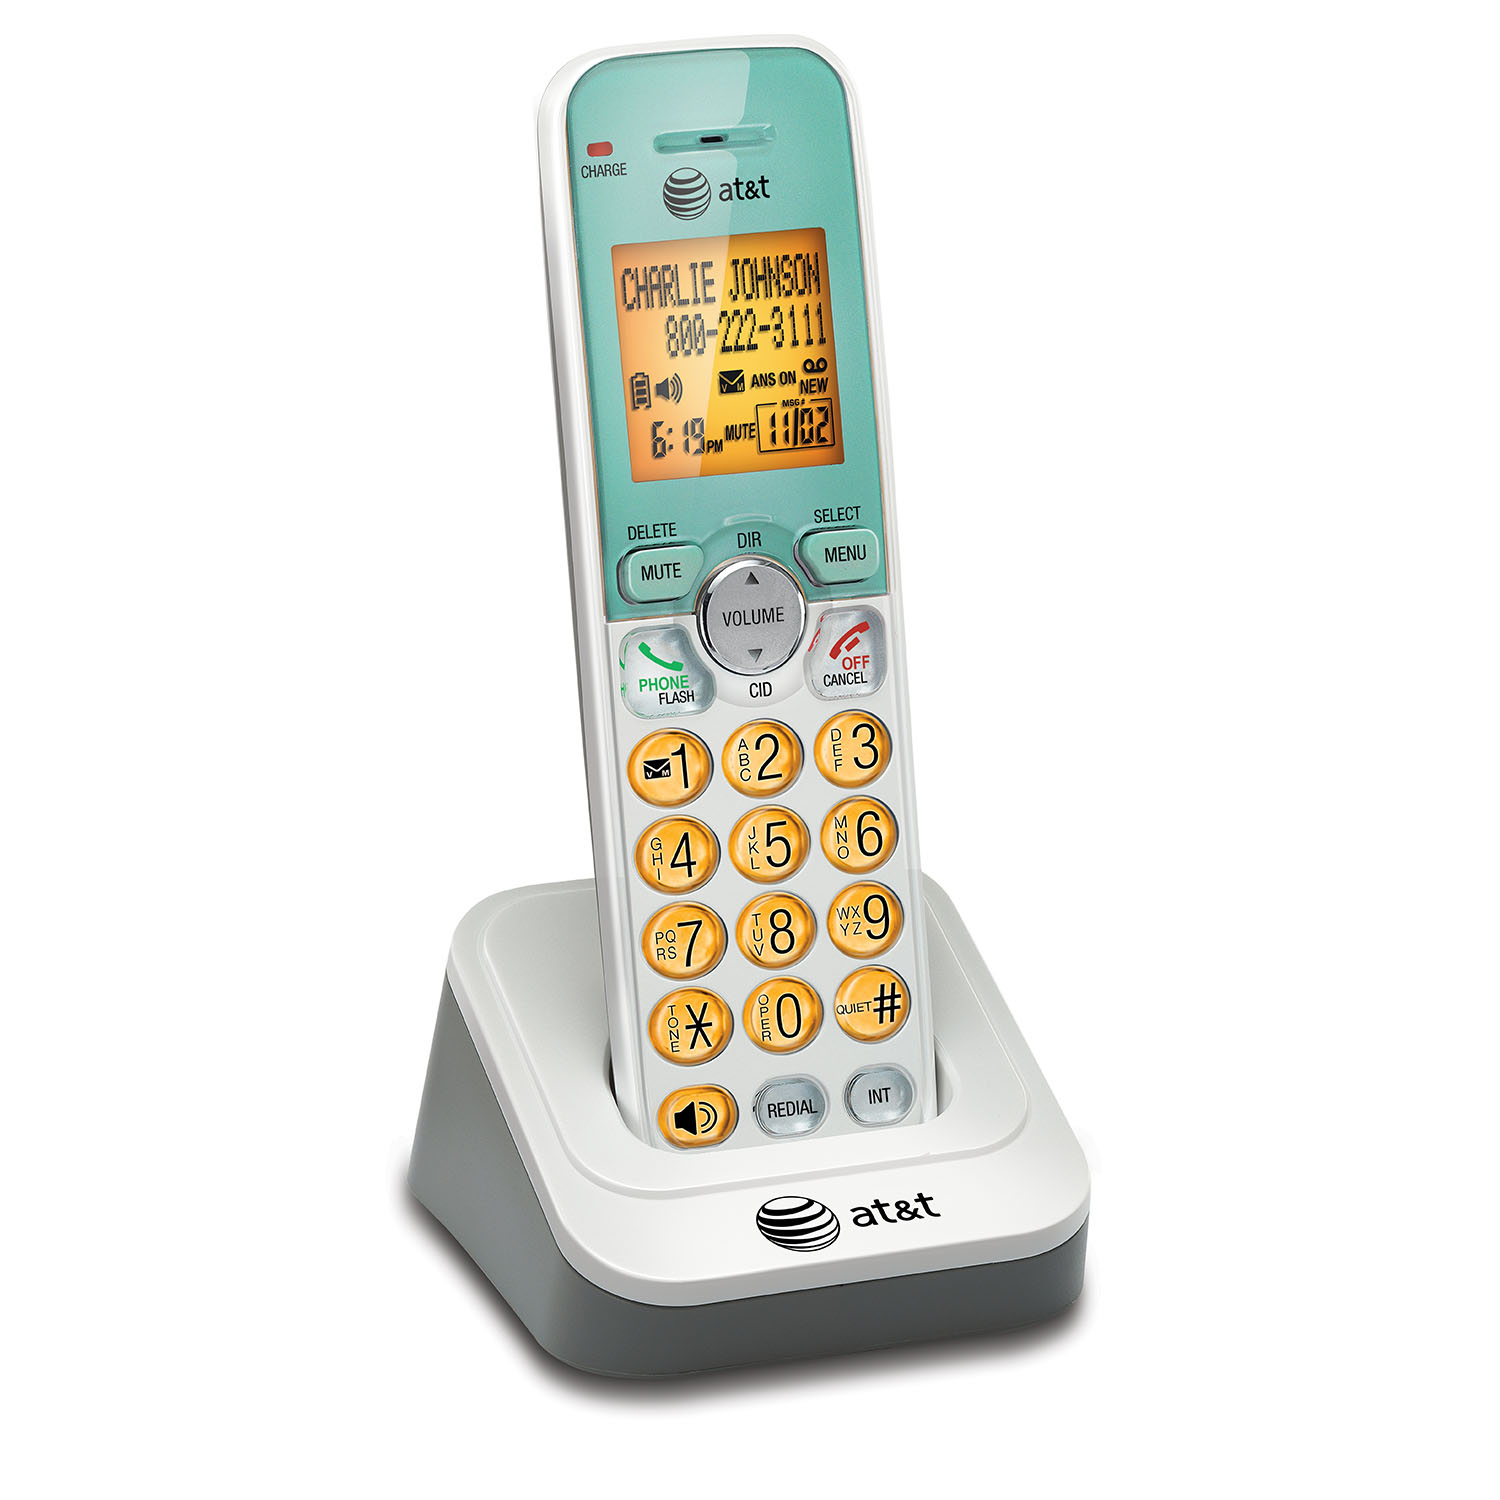 3 handset cordless answering system with caller ID/call waiting - view 5